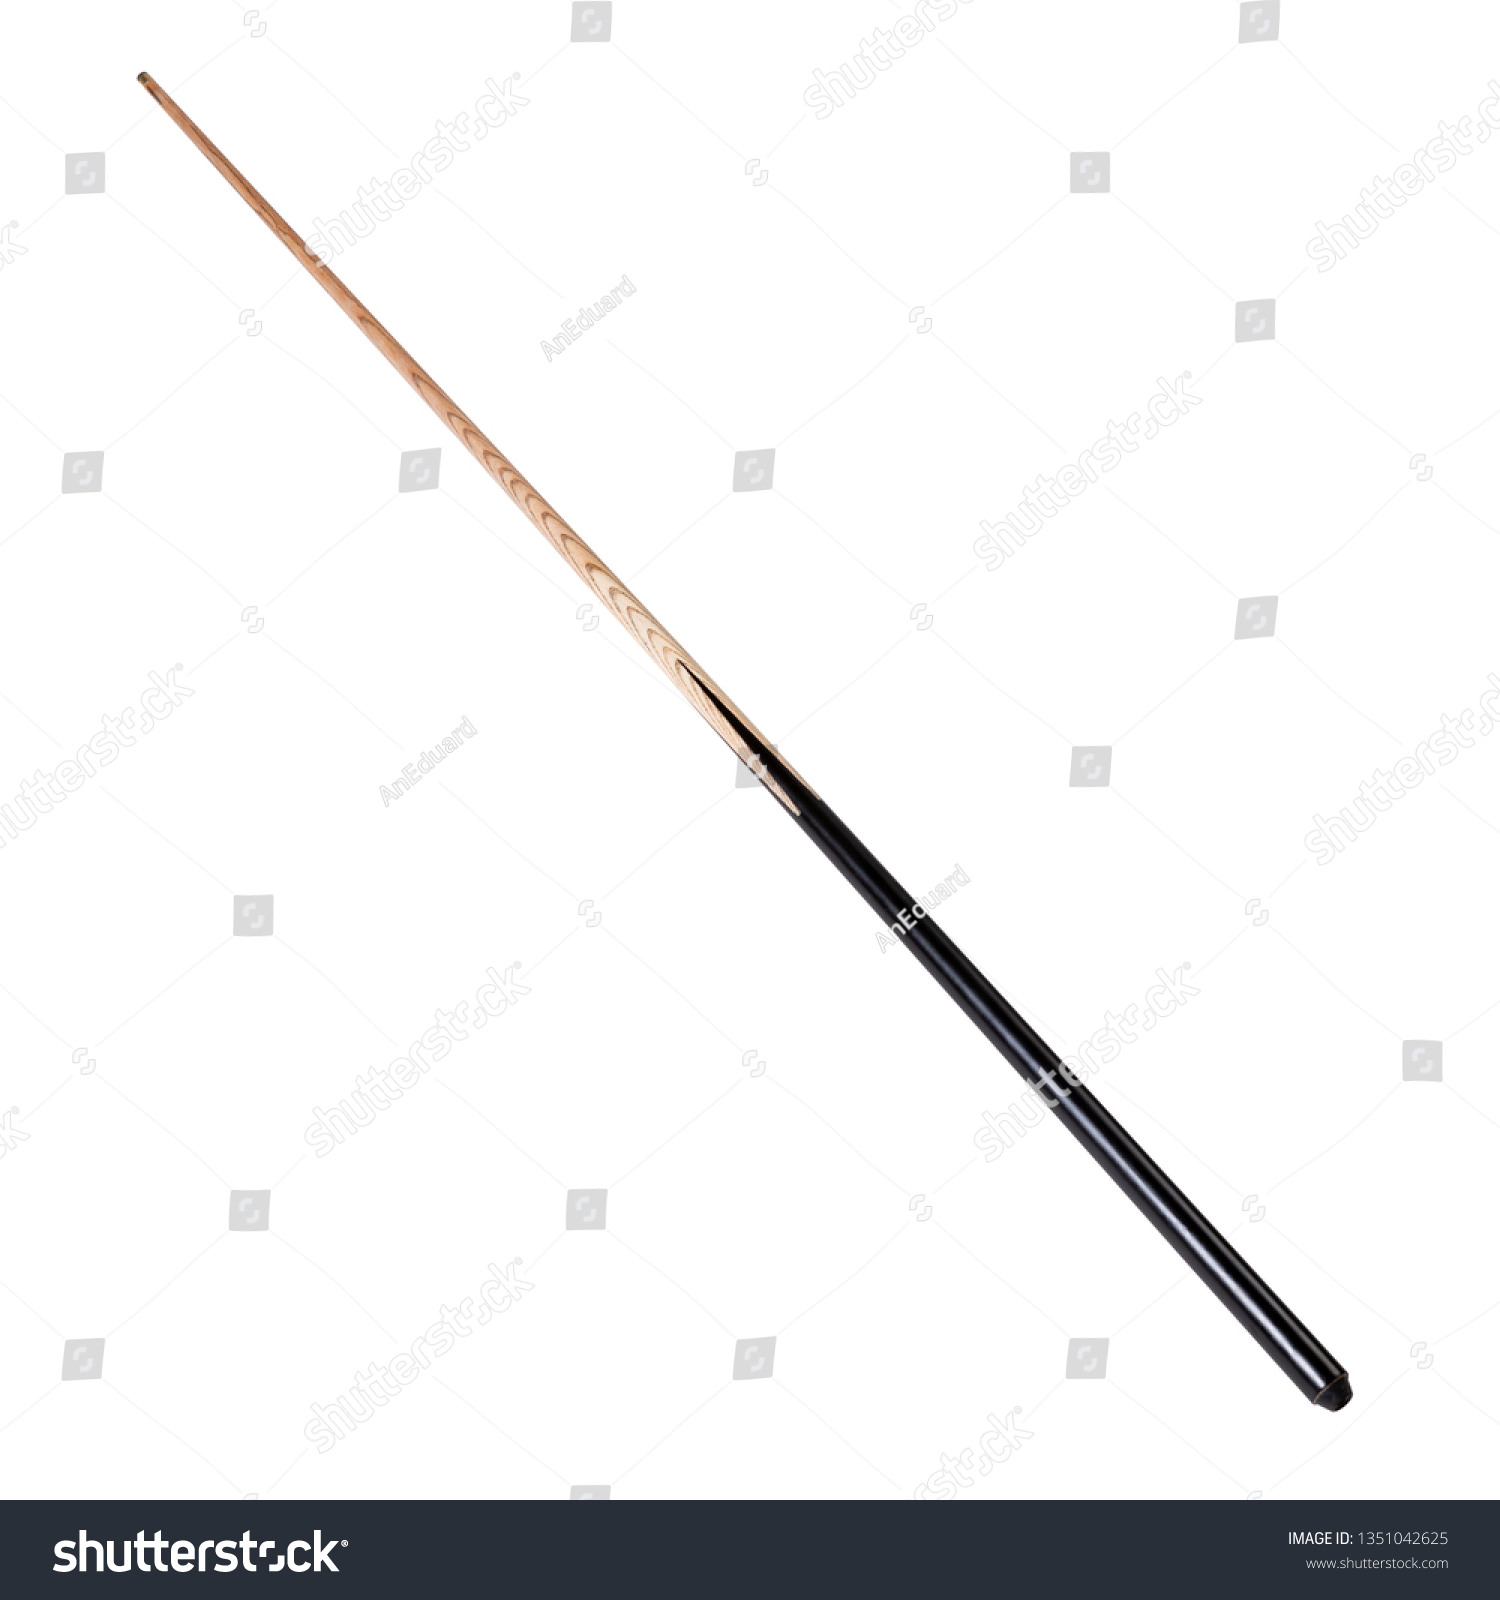 wooden cue for billiards with a black handle, on a white background, isolate #1351042625